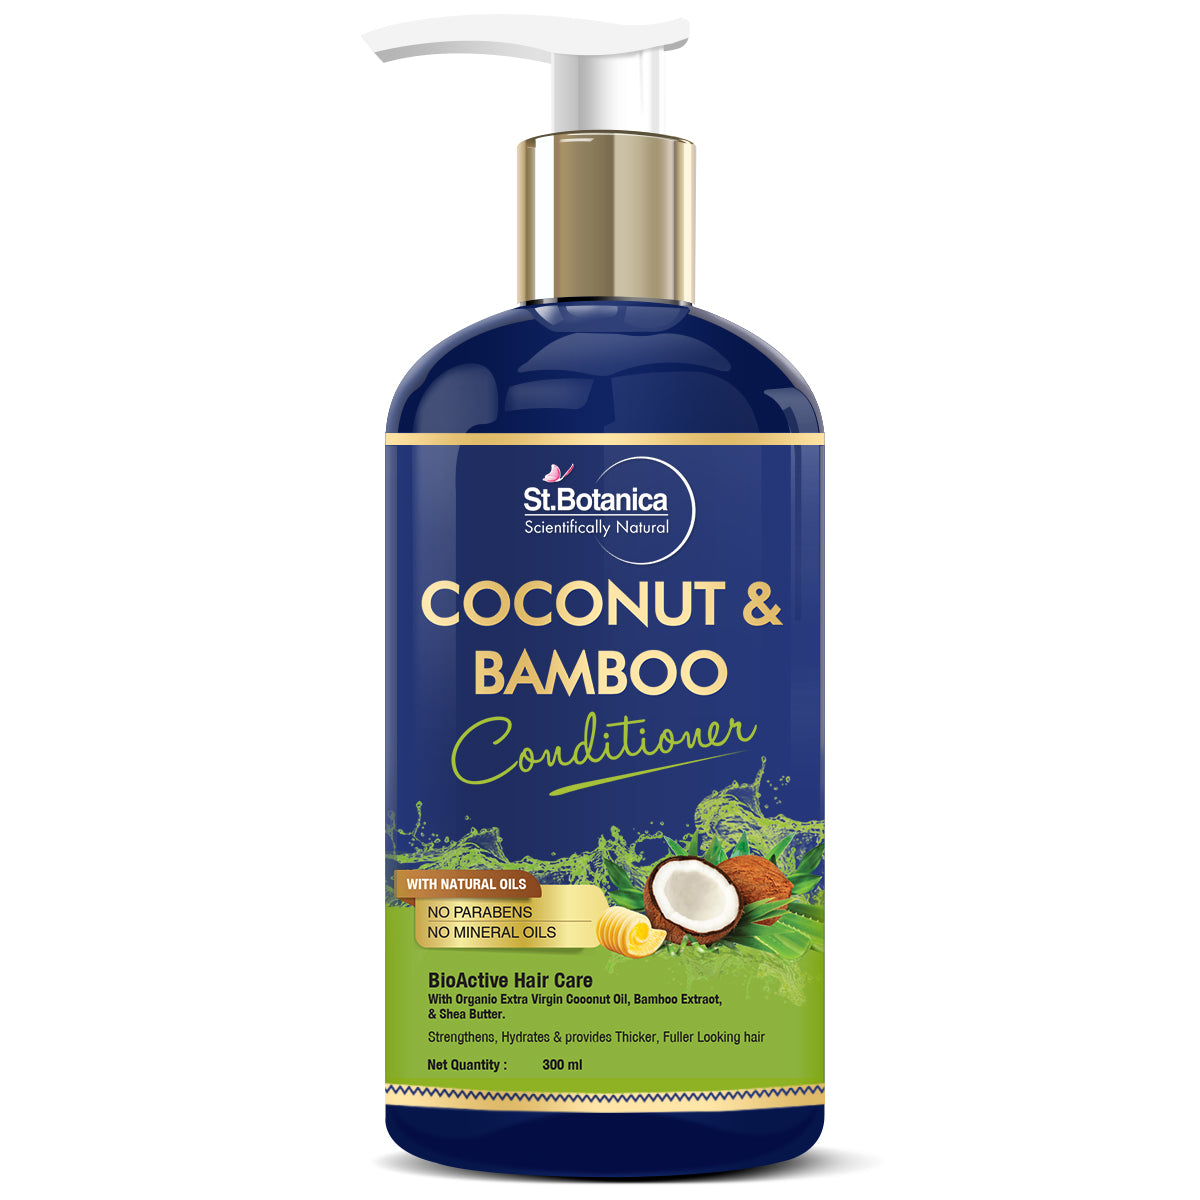 St.Botanica Coconut & Bamboo Hair Conditioner, 300ml - For Hair Strength & Hydration, with Organic Virgin Coconut Oil, Shea Butter & Aloevera.